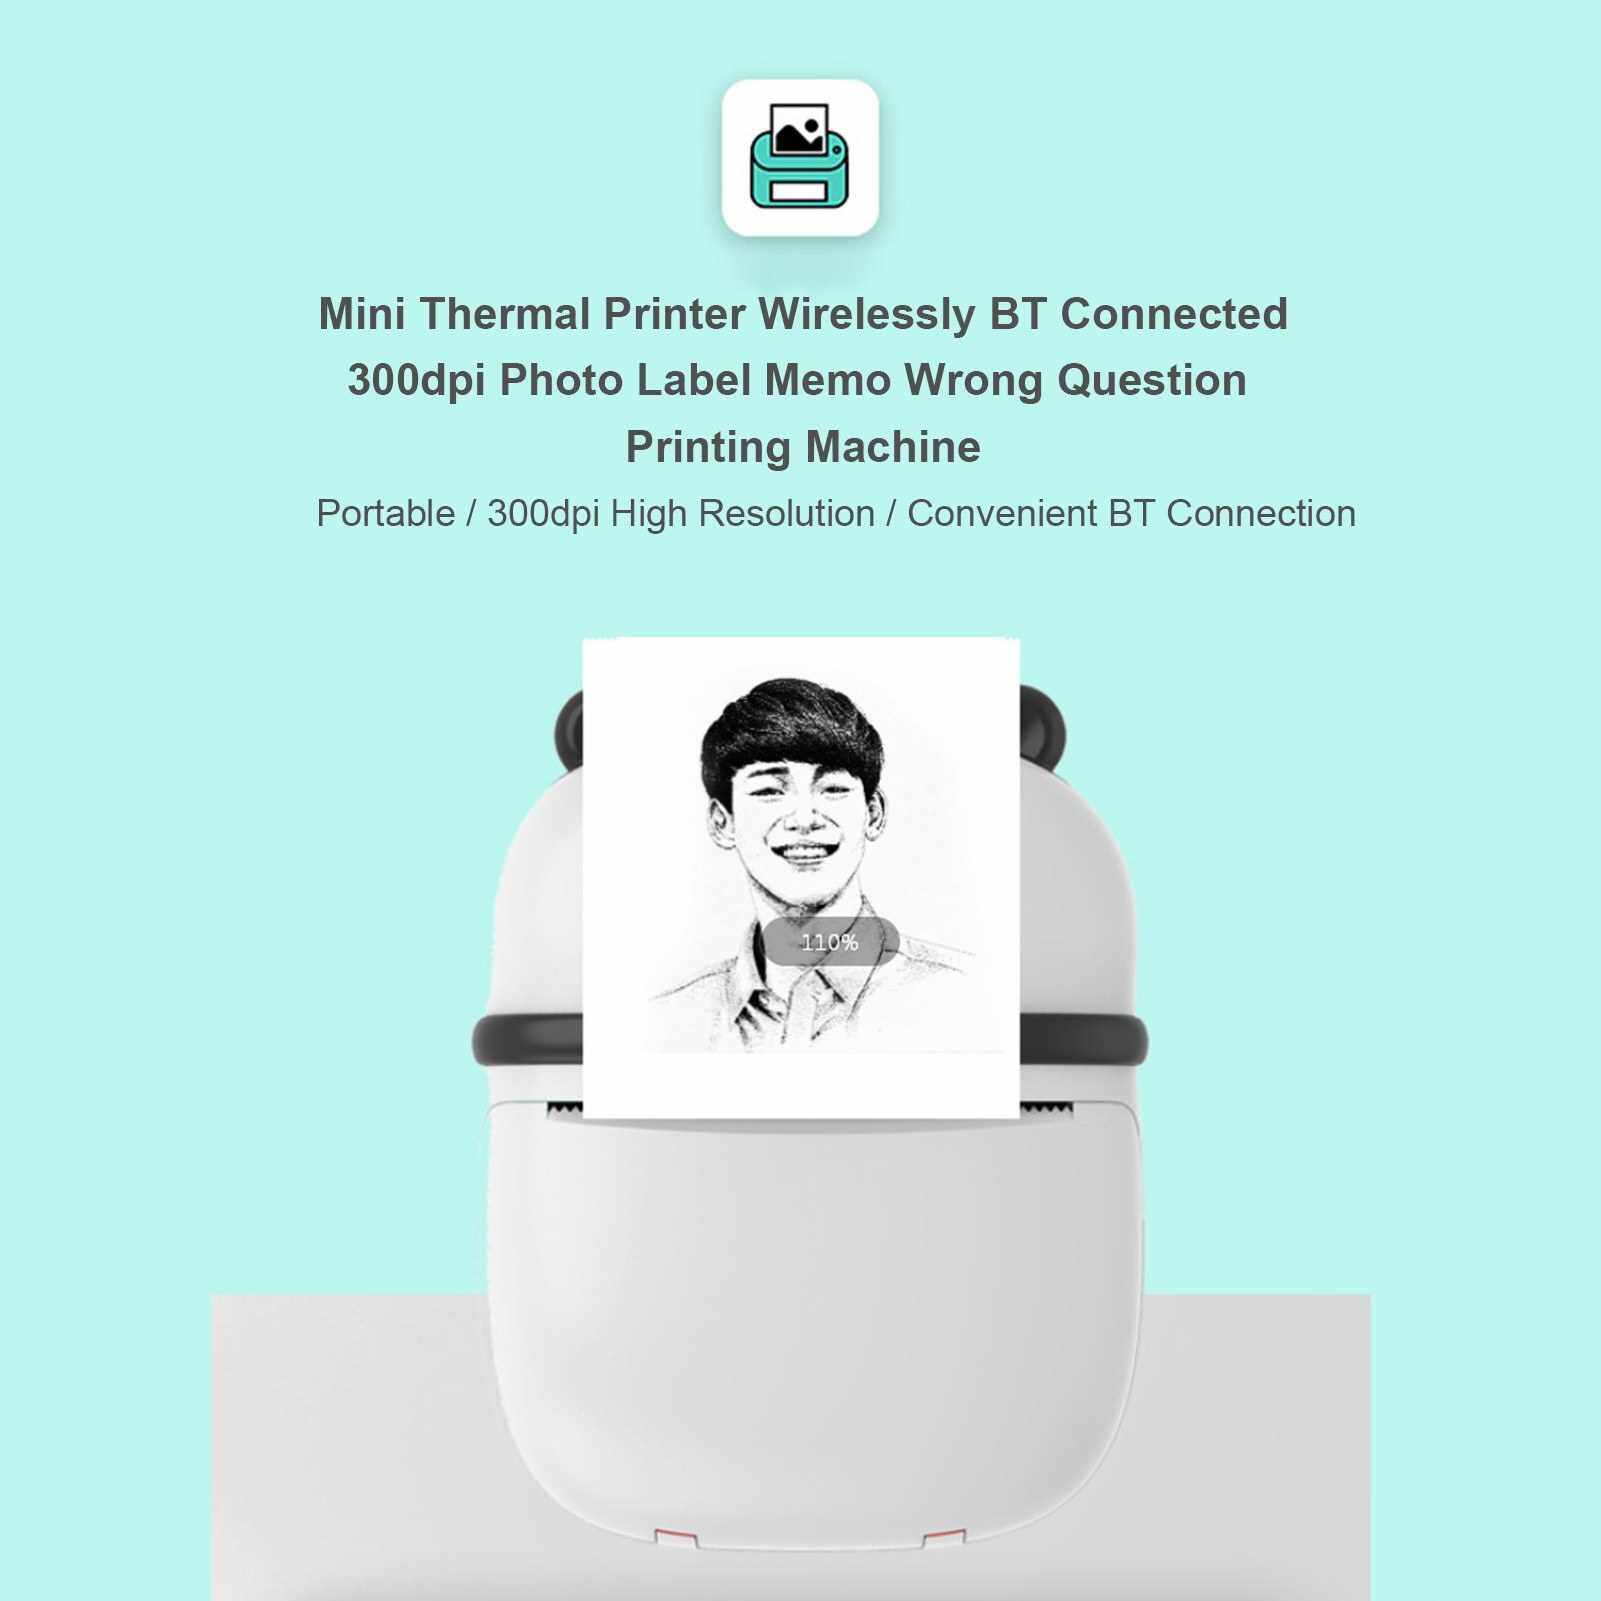 Mini Thermal Printer Wirelessly BT Connected 300dpi Photo Label Memo Wrong Question Printing Machine Tool Portable for Home Office Daily Use Students (Blue)